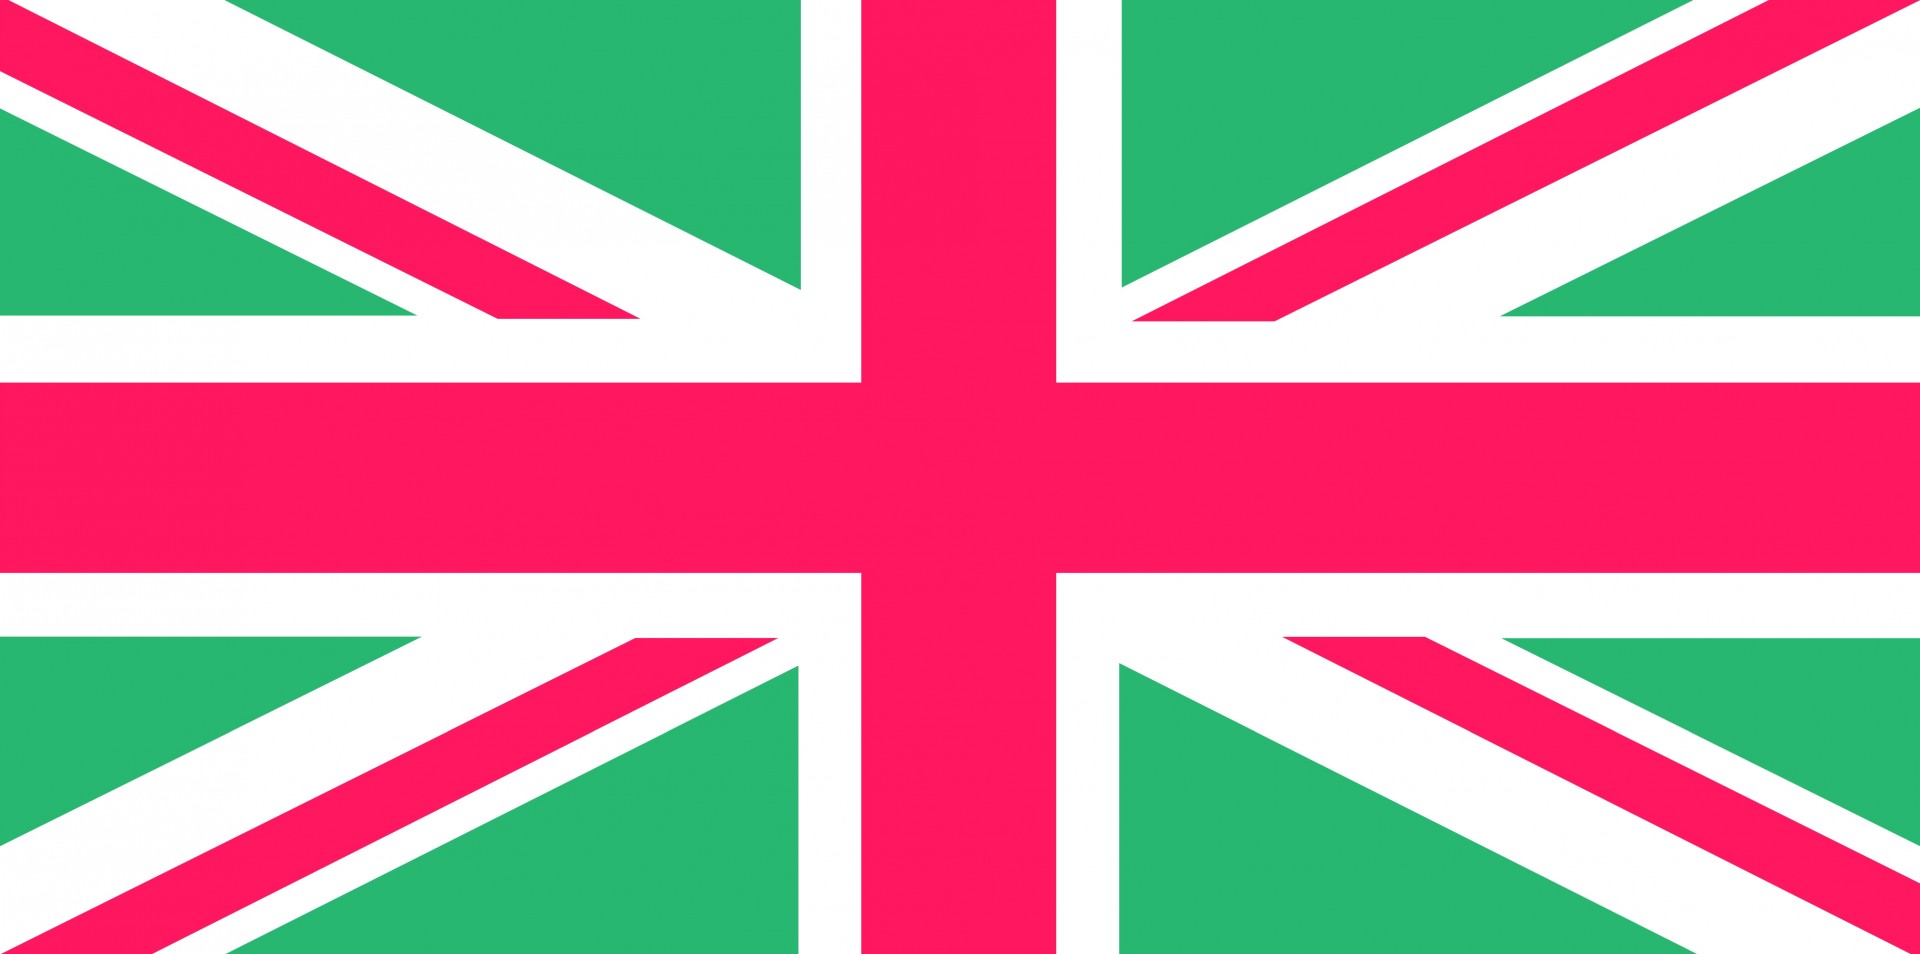 Pink and green Union Jack flag of the UK clipart.